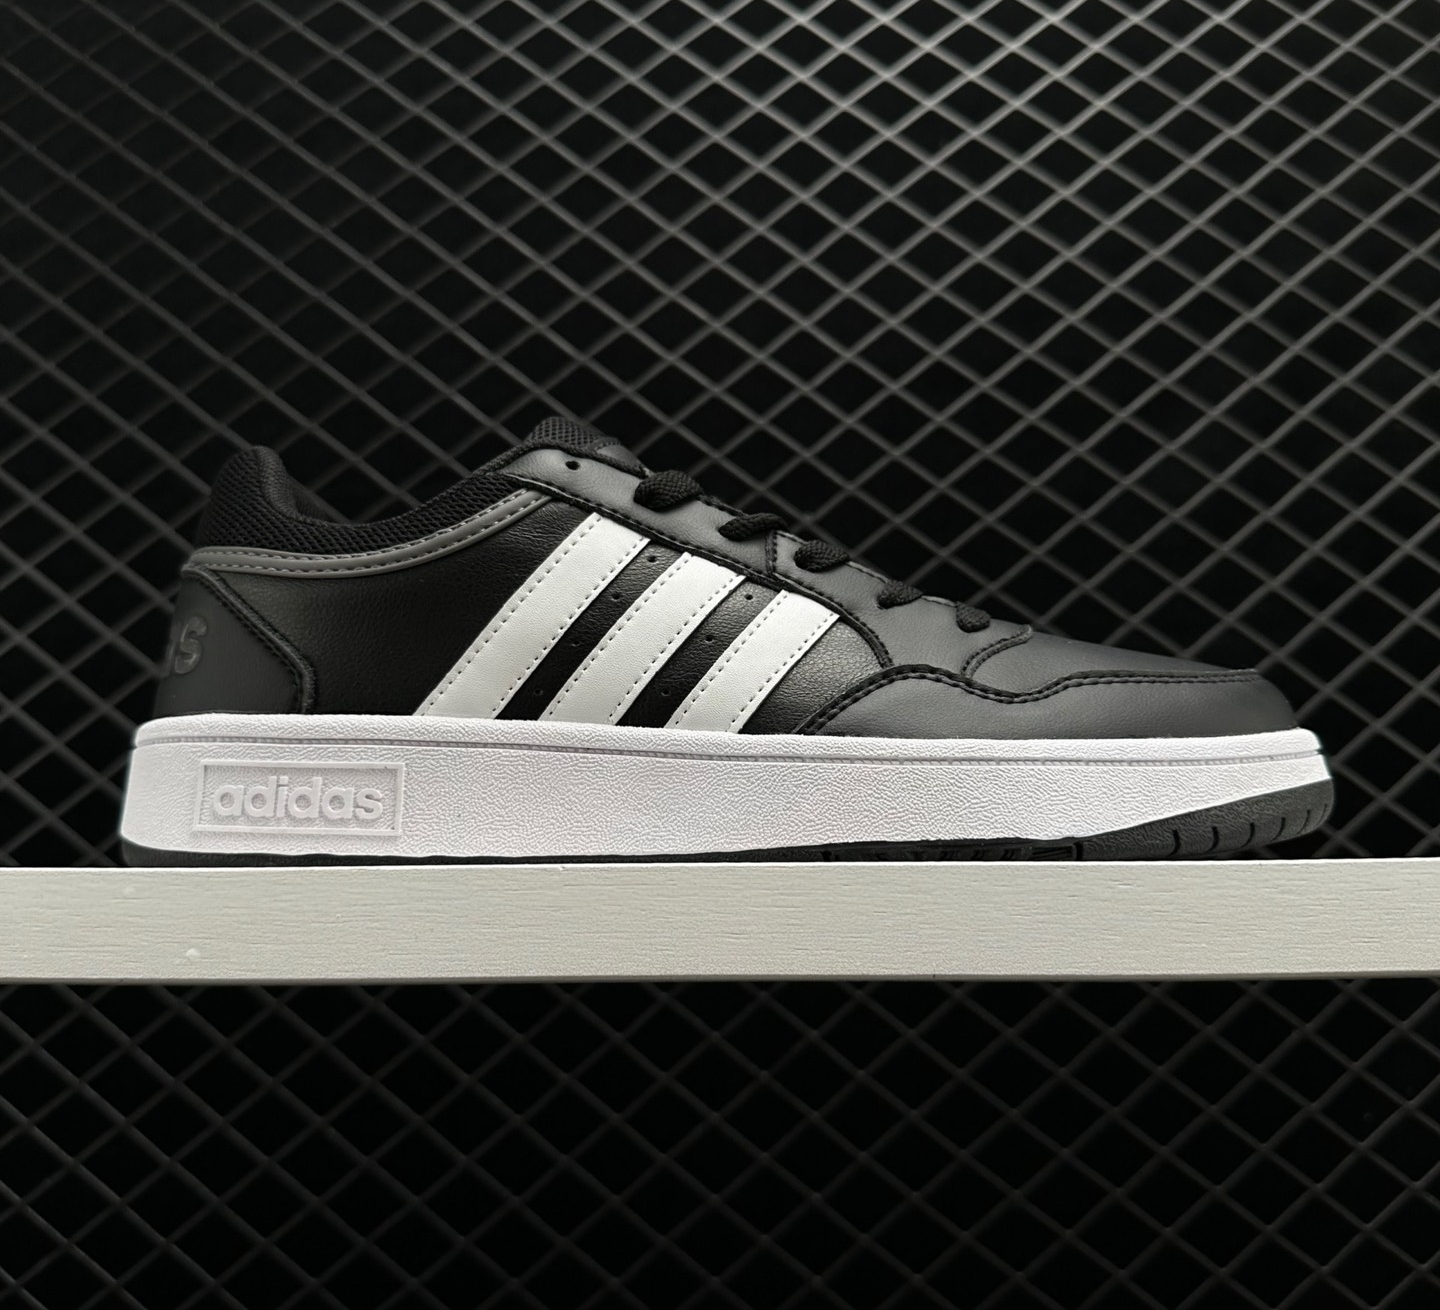 Adidas Hoops 3.0 Low 'Core Black Grey' GY5432 - Stylish and Versatile Footwear - Order Now!